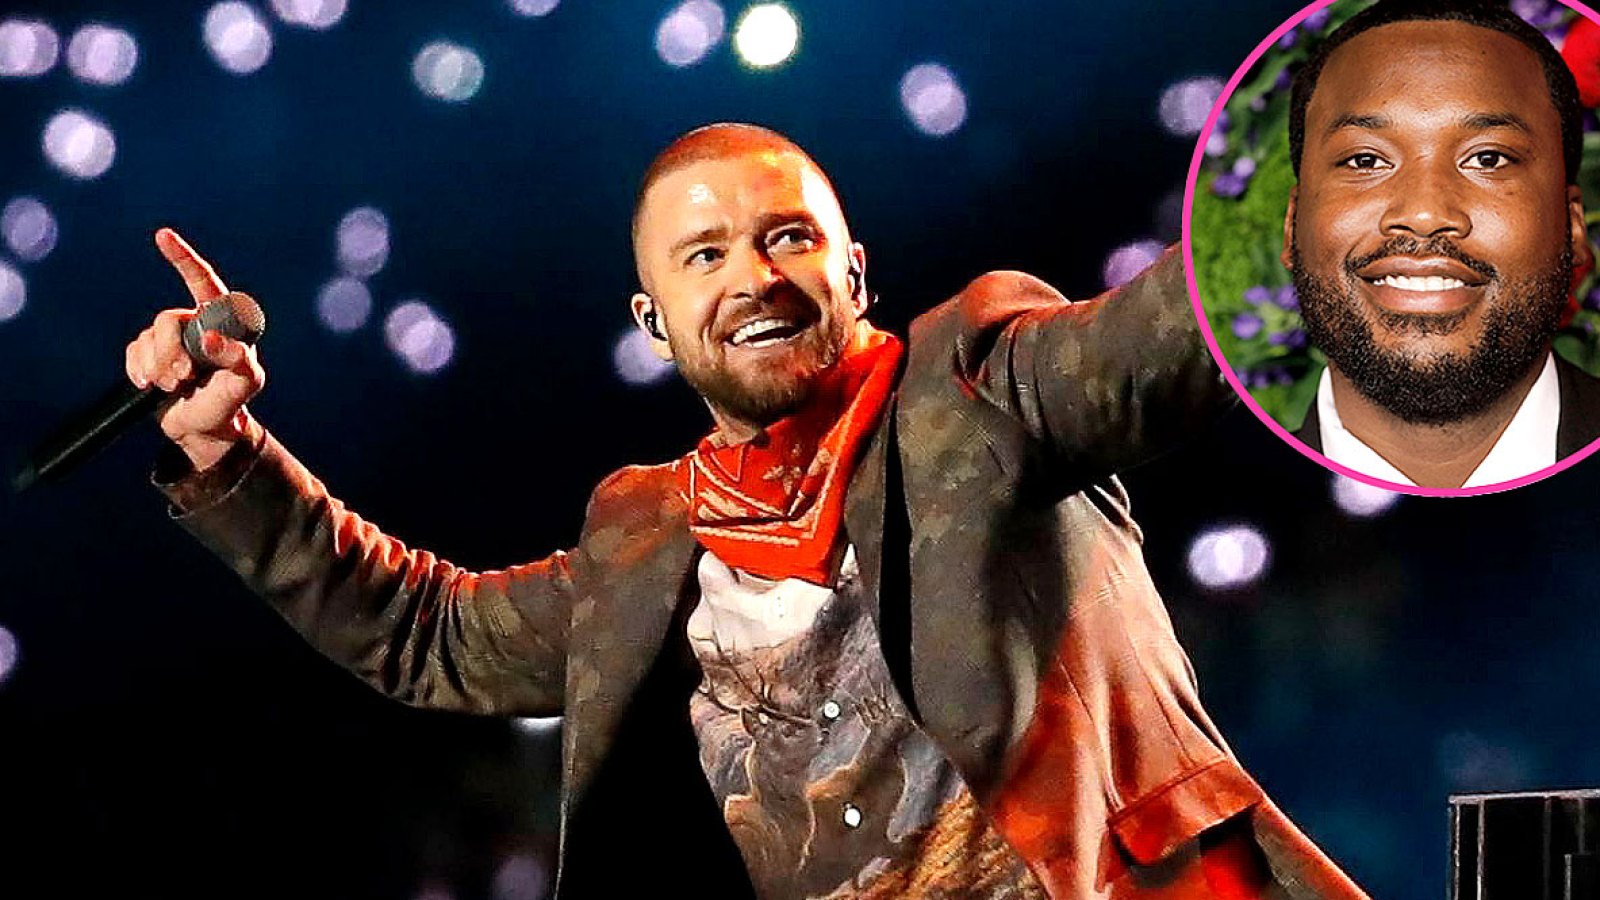 Justin Timberlake Releases New Song ‘Believe’ With Meek Mill